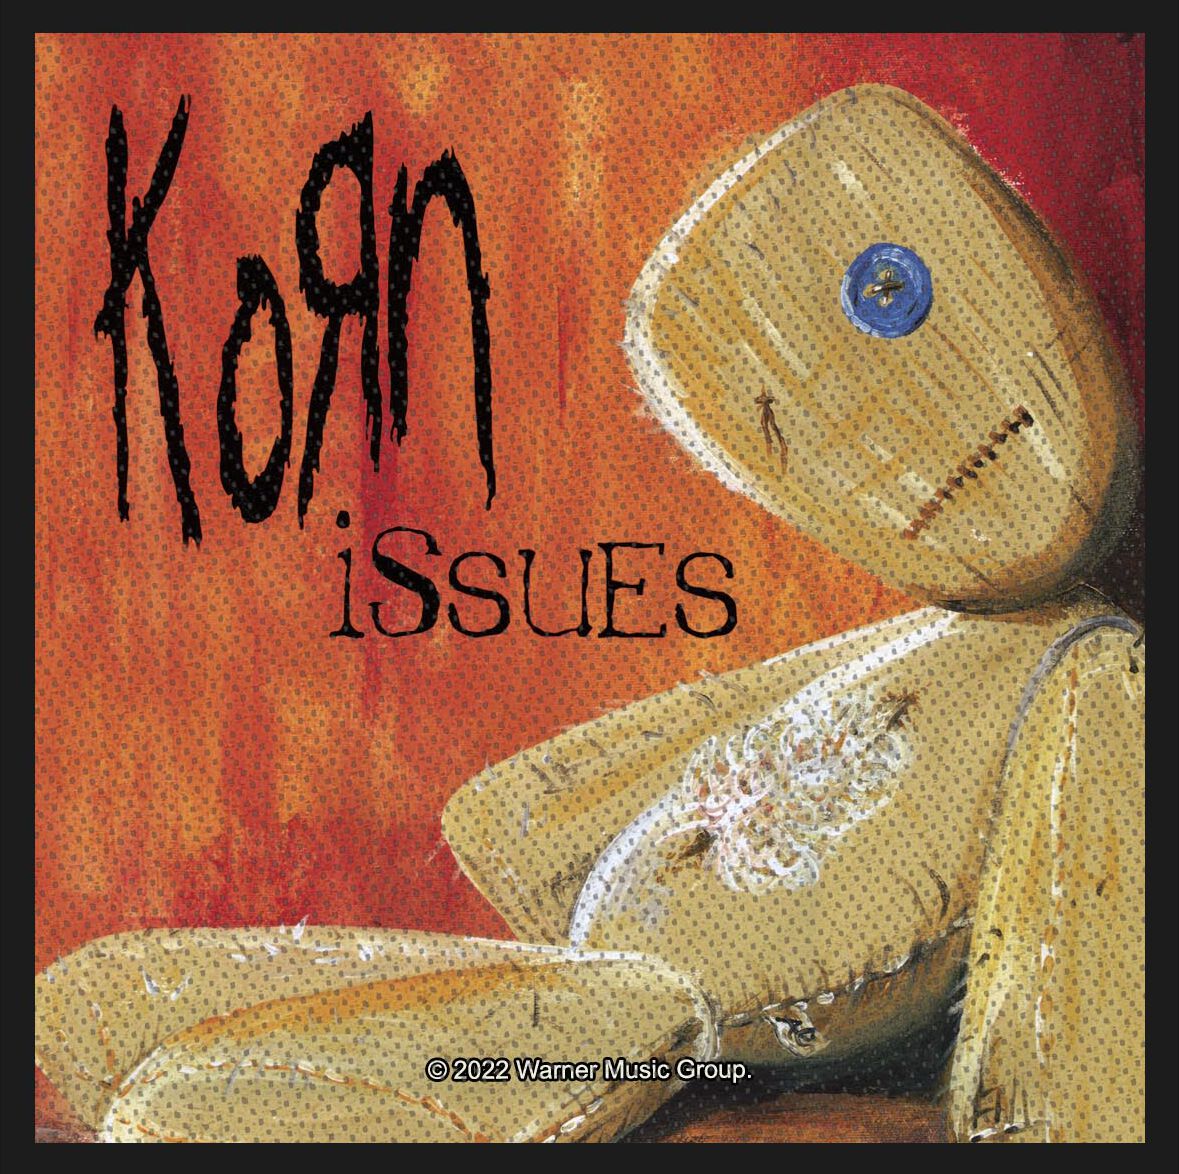 Korn Issues Patch multicolor